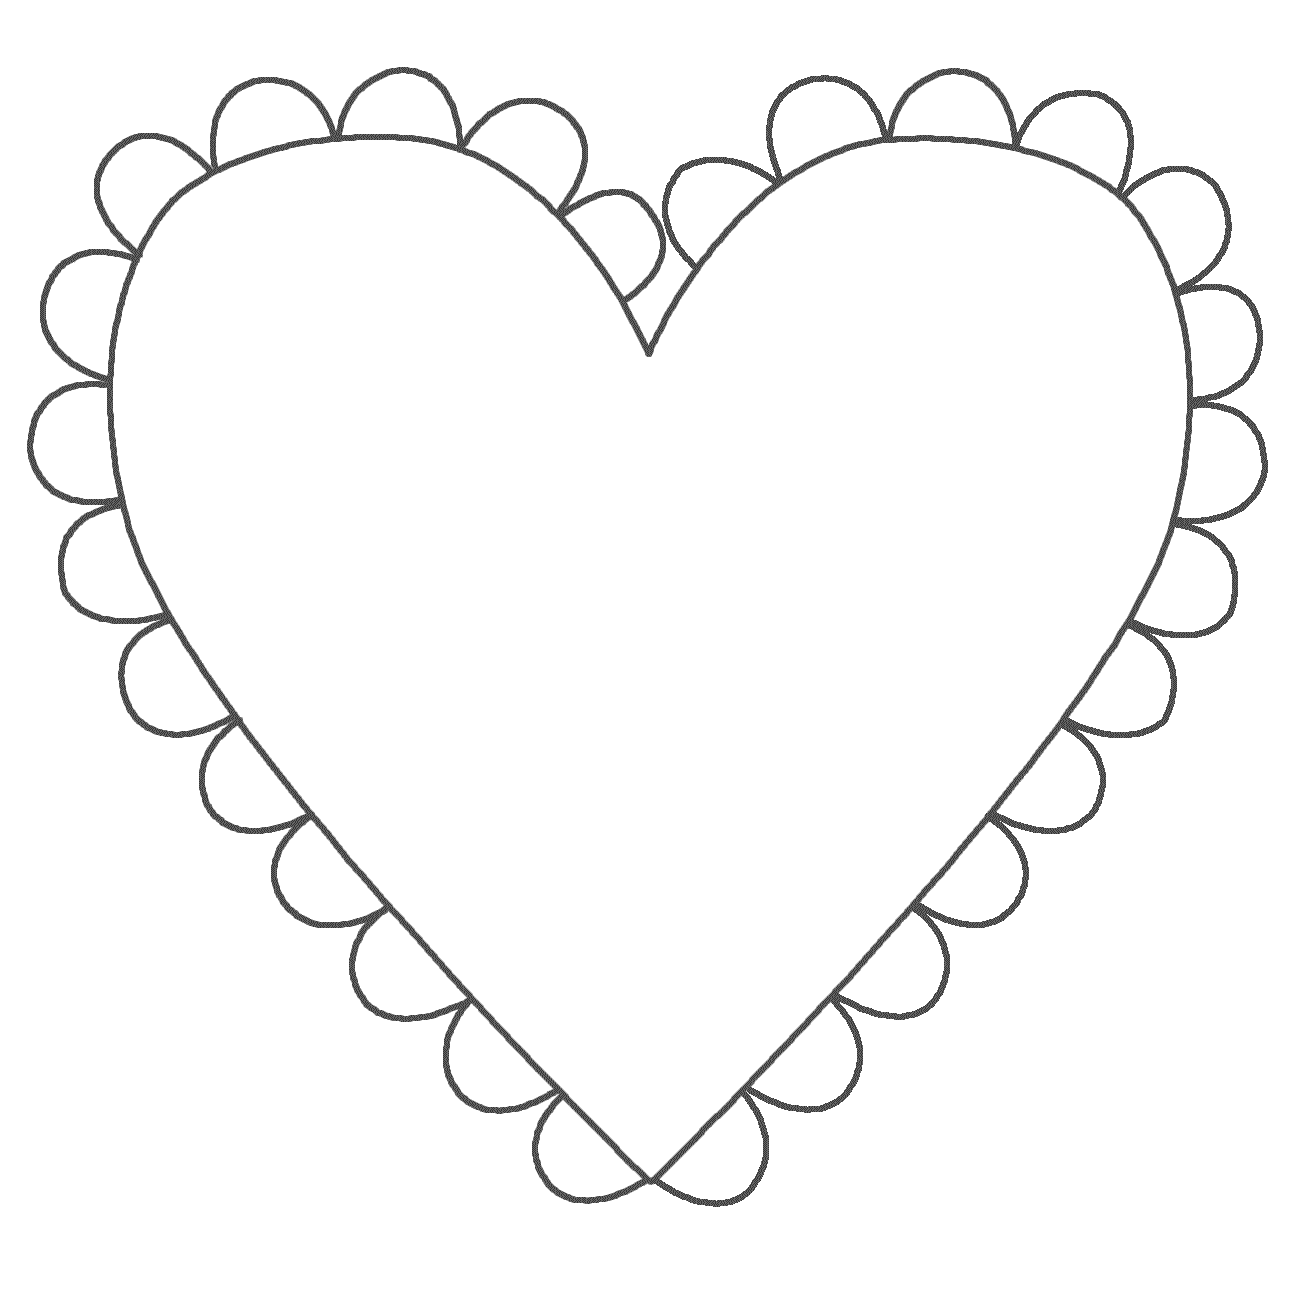 heart shape coloring pages abstract heart coloring pages difficult abstract for coloring heart pages shape 